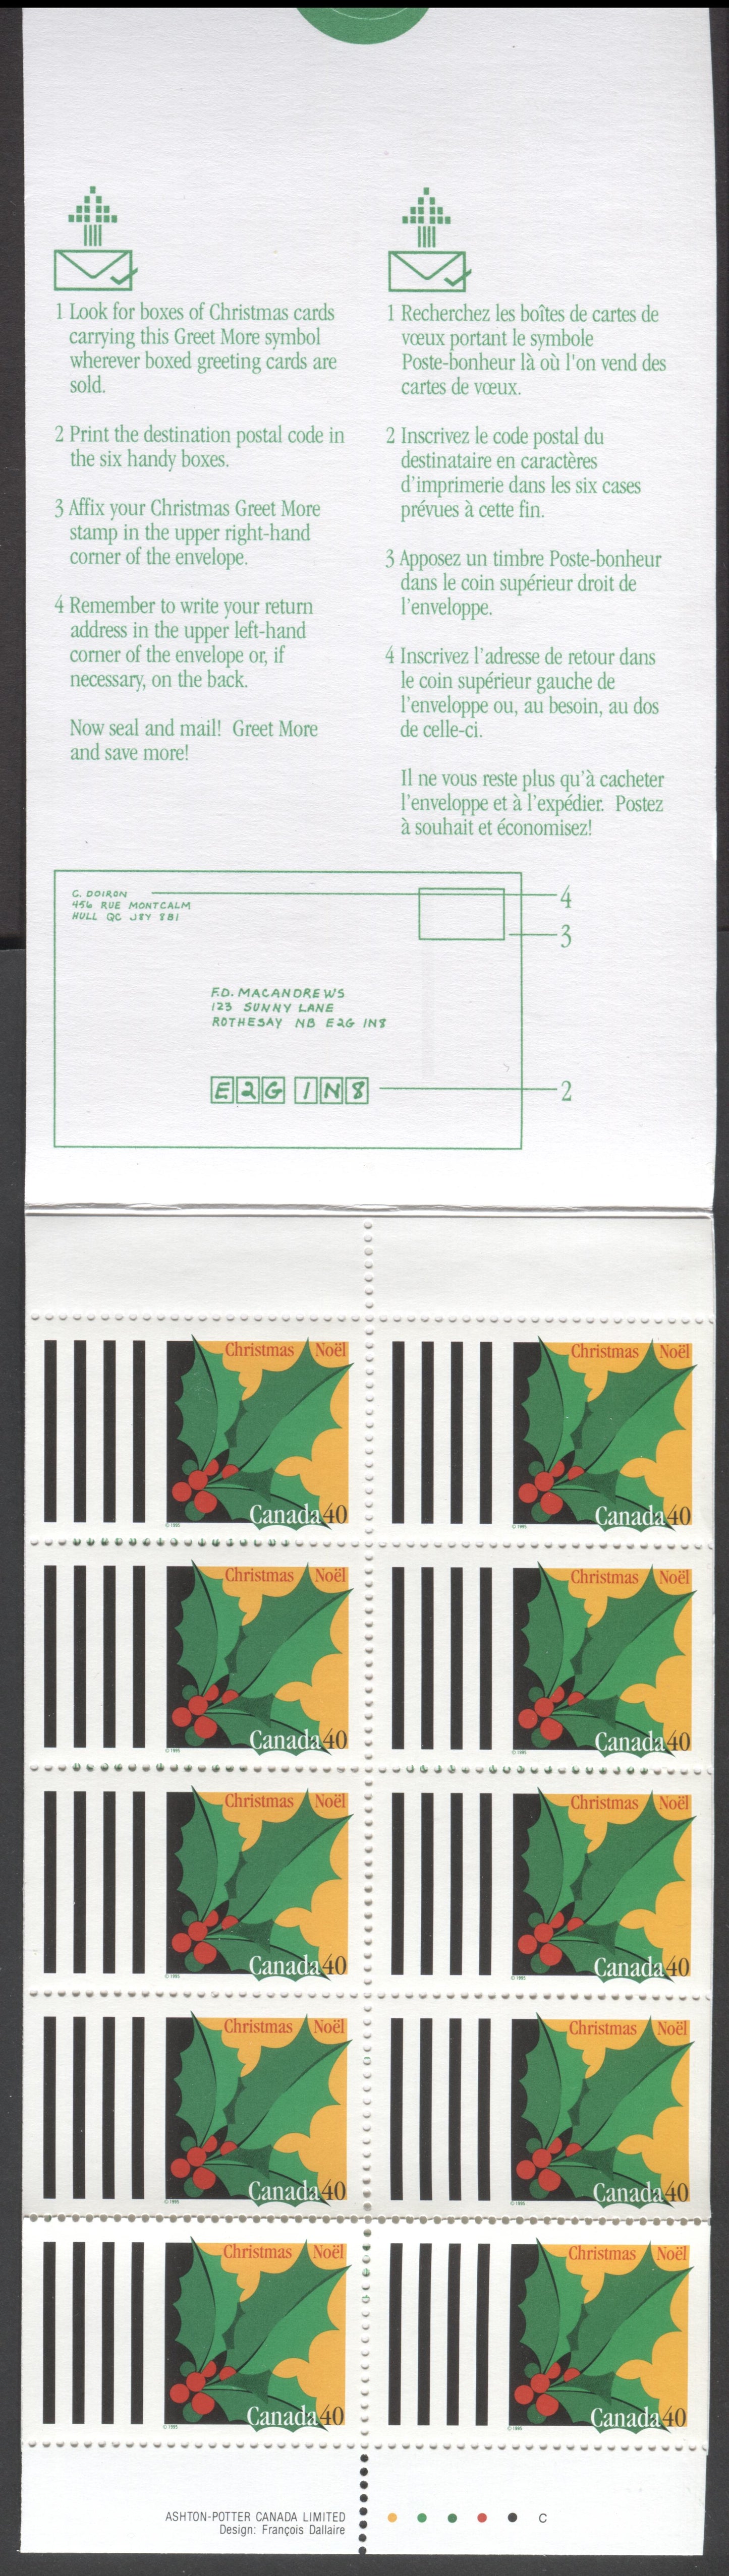 Canada #BK186a-b 1995 Christmas Issue, Complete $4 Booklet, Coated Papers Paper, Dead Paper, 4 mm GT-4 Tagging & 4 Additional Bars on Left